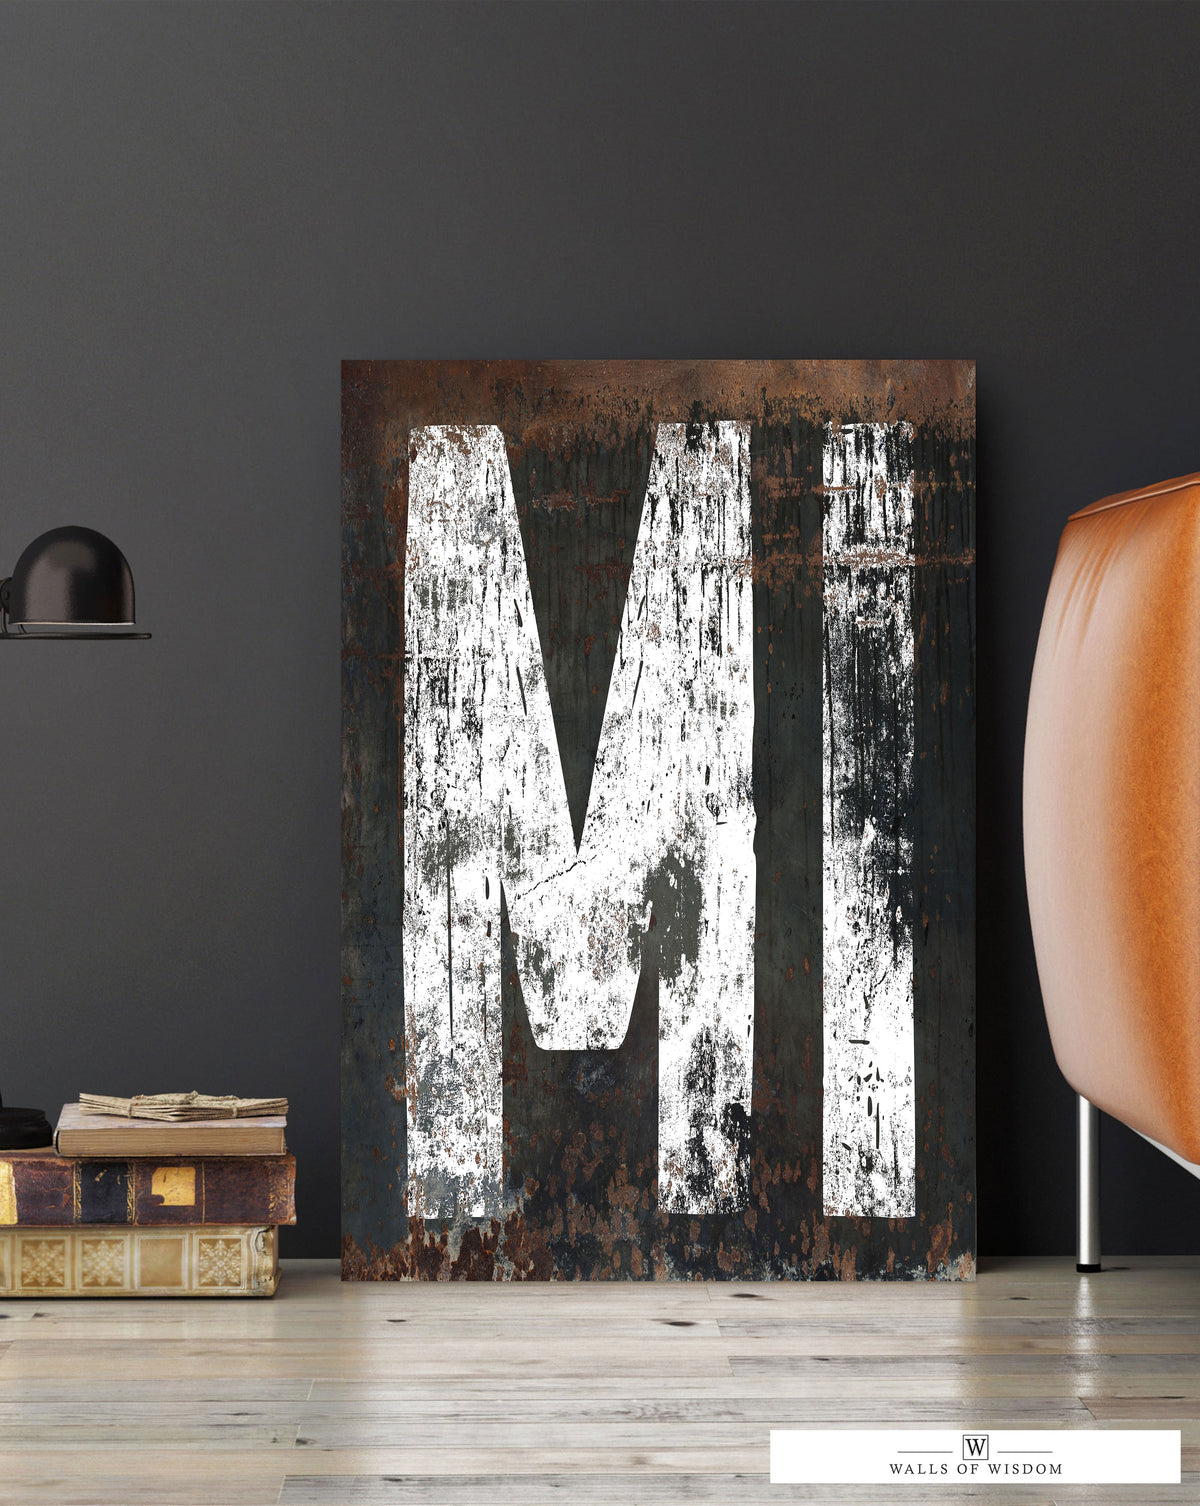 Michigan State Sign Canvas Art - MI Home State Wall Art: From Western to Boho, a Decorative Masterpiece